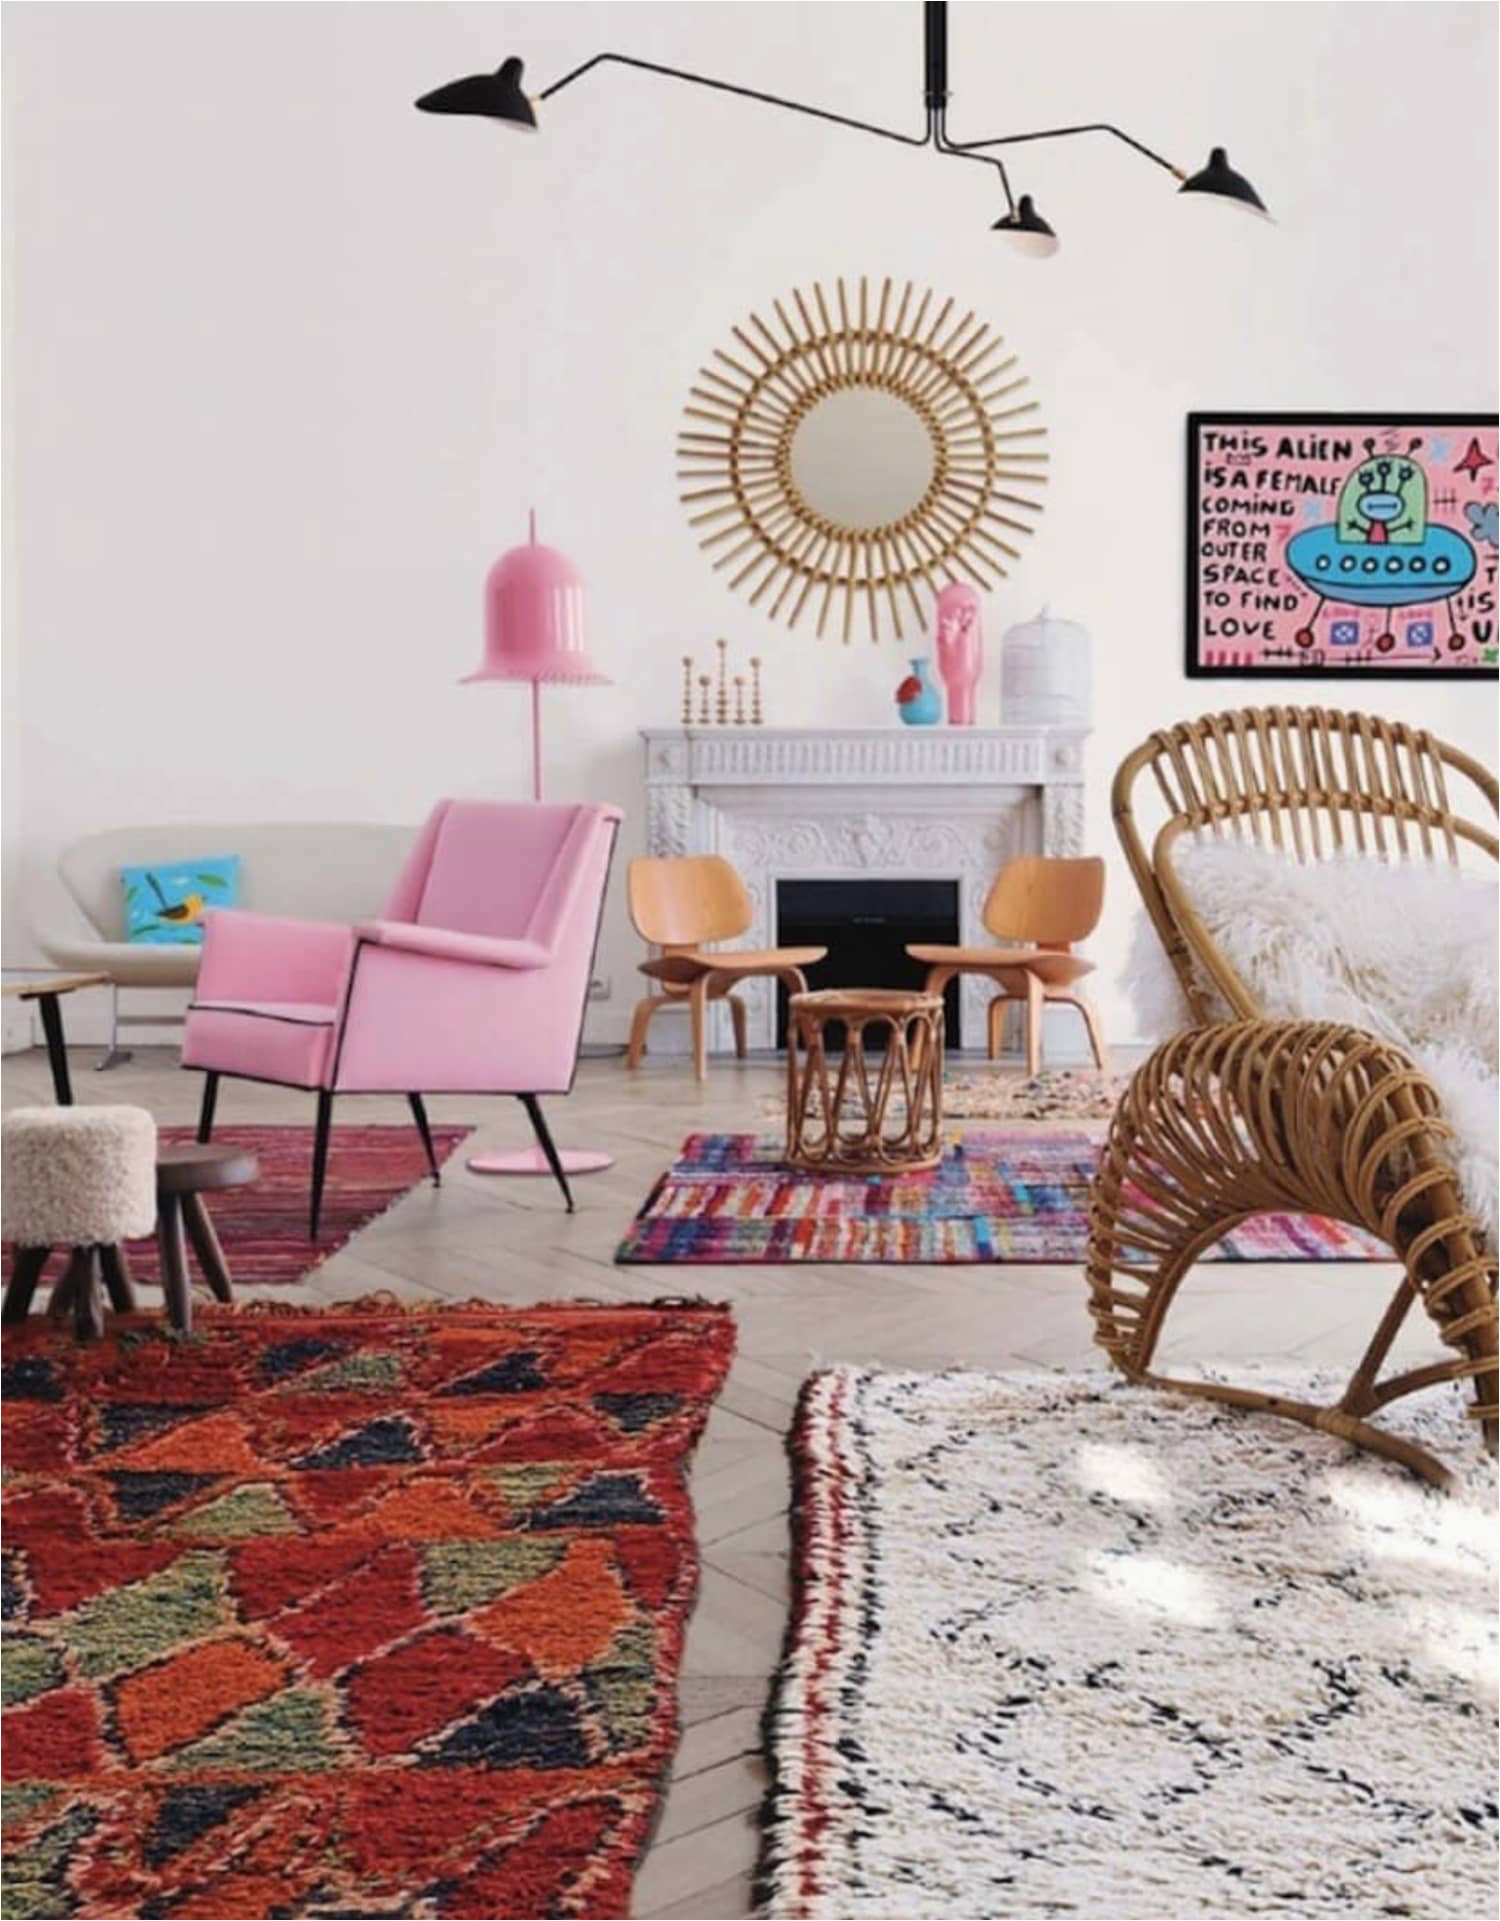 Does Floor and Decor Have area Rugs How to Skillfully Bine Multiple Rugs In A Room